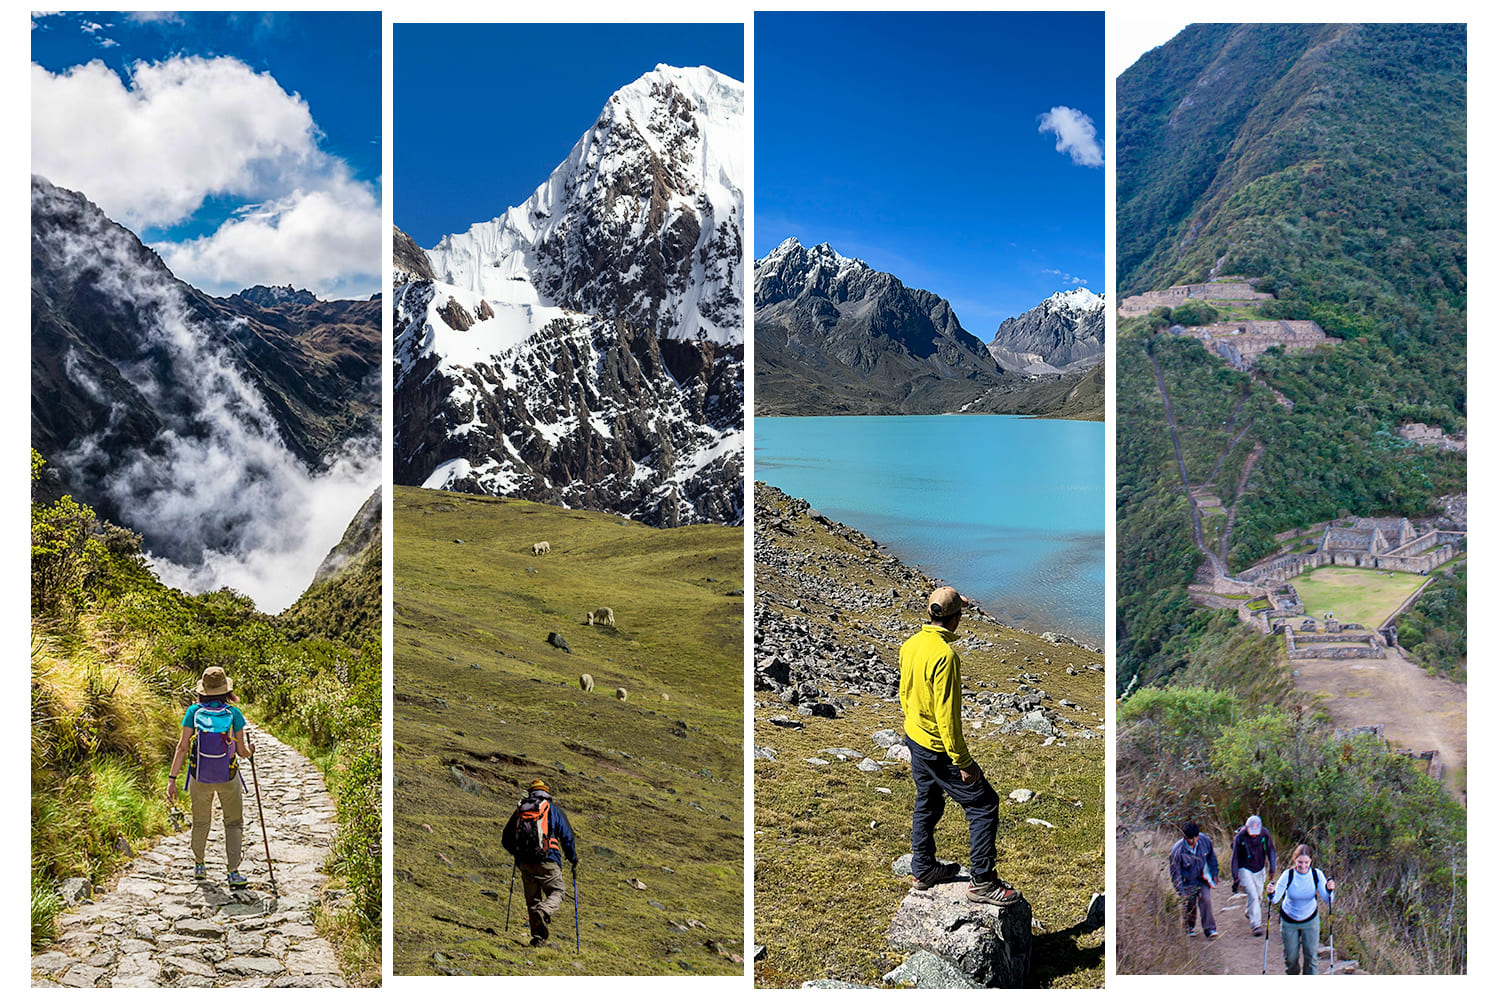 Hiking in the Andes of Peru